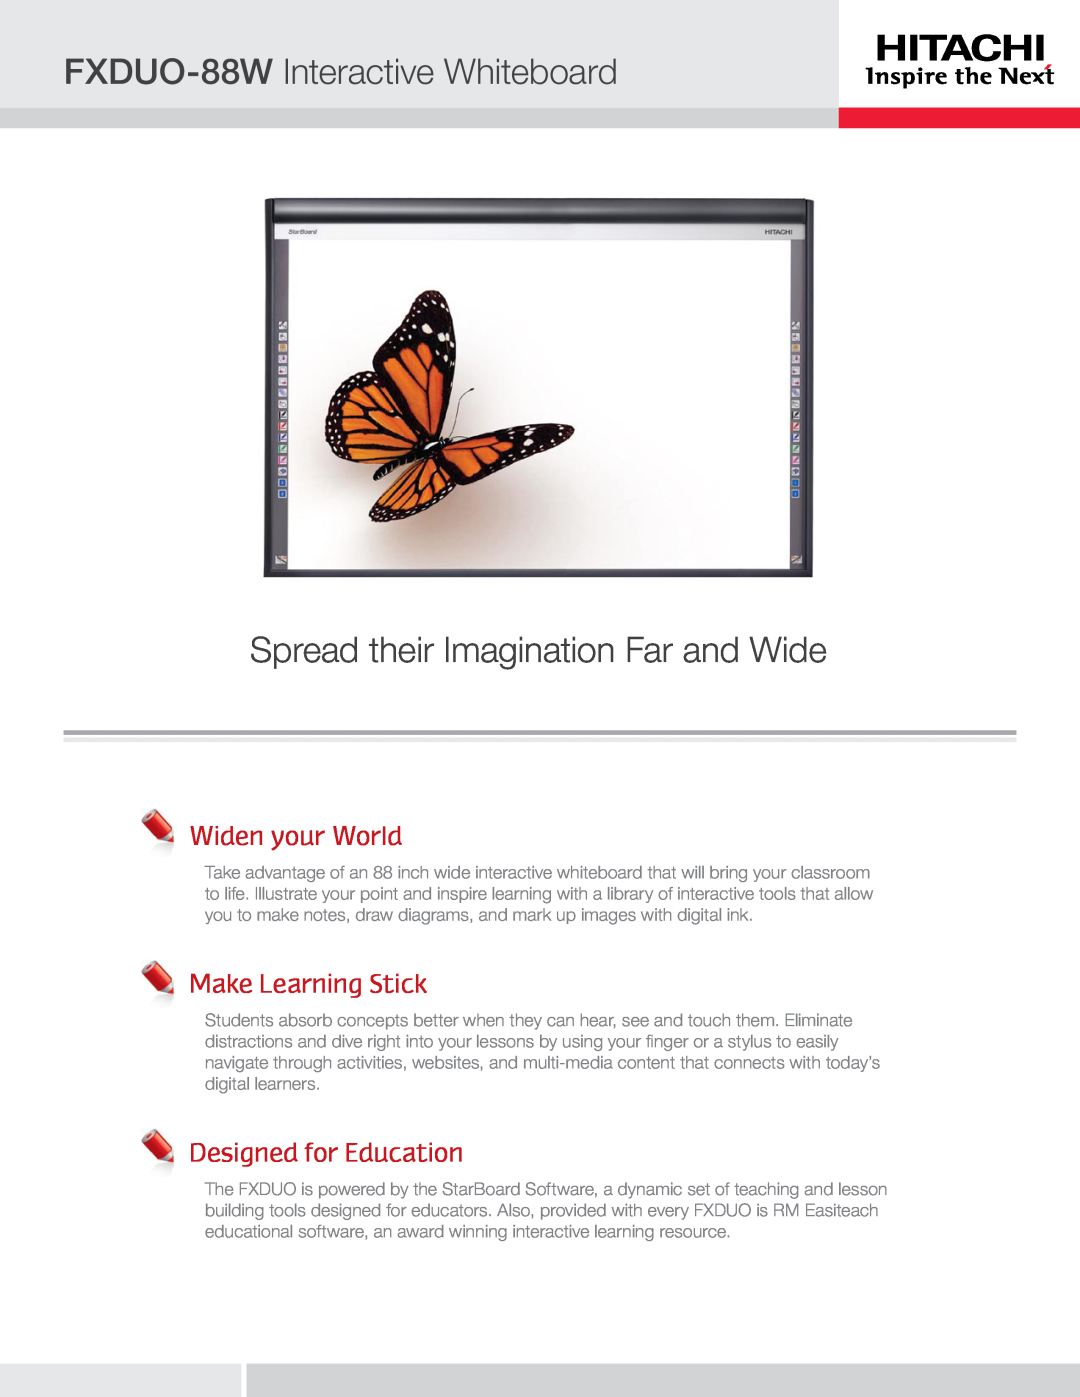 Hitachi manual Widen your World, Make Learning Stick, Designed for Education, FXDUO-88W Interactive Whiteboard 